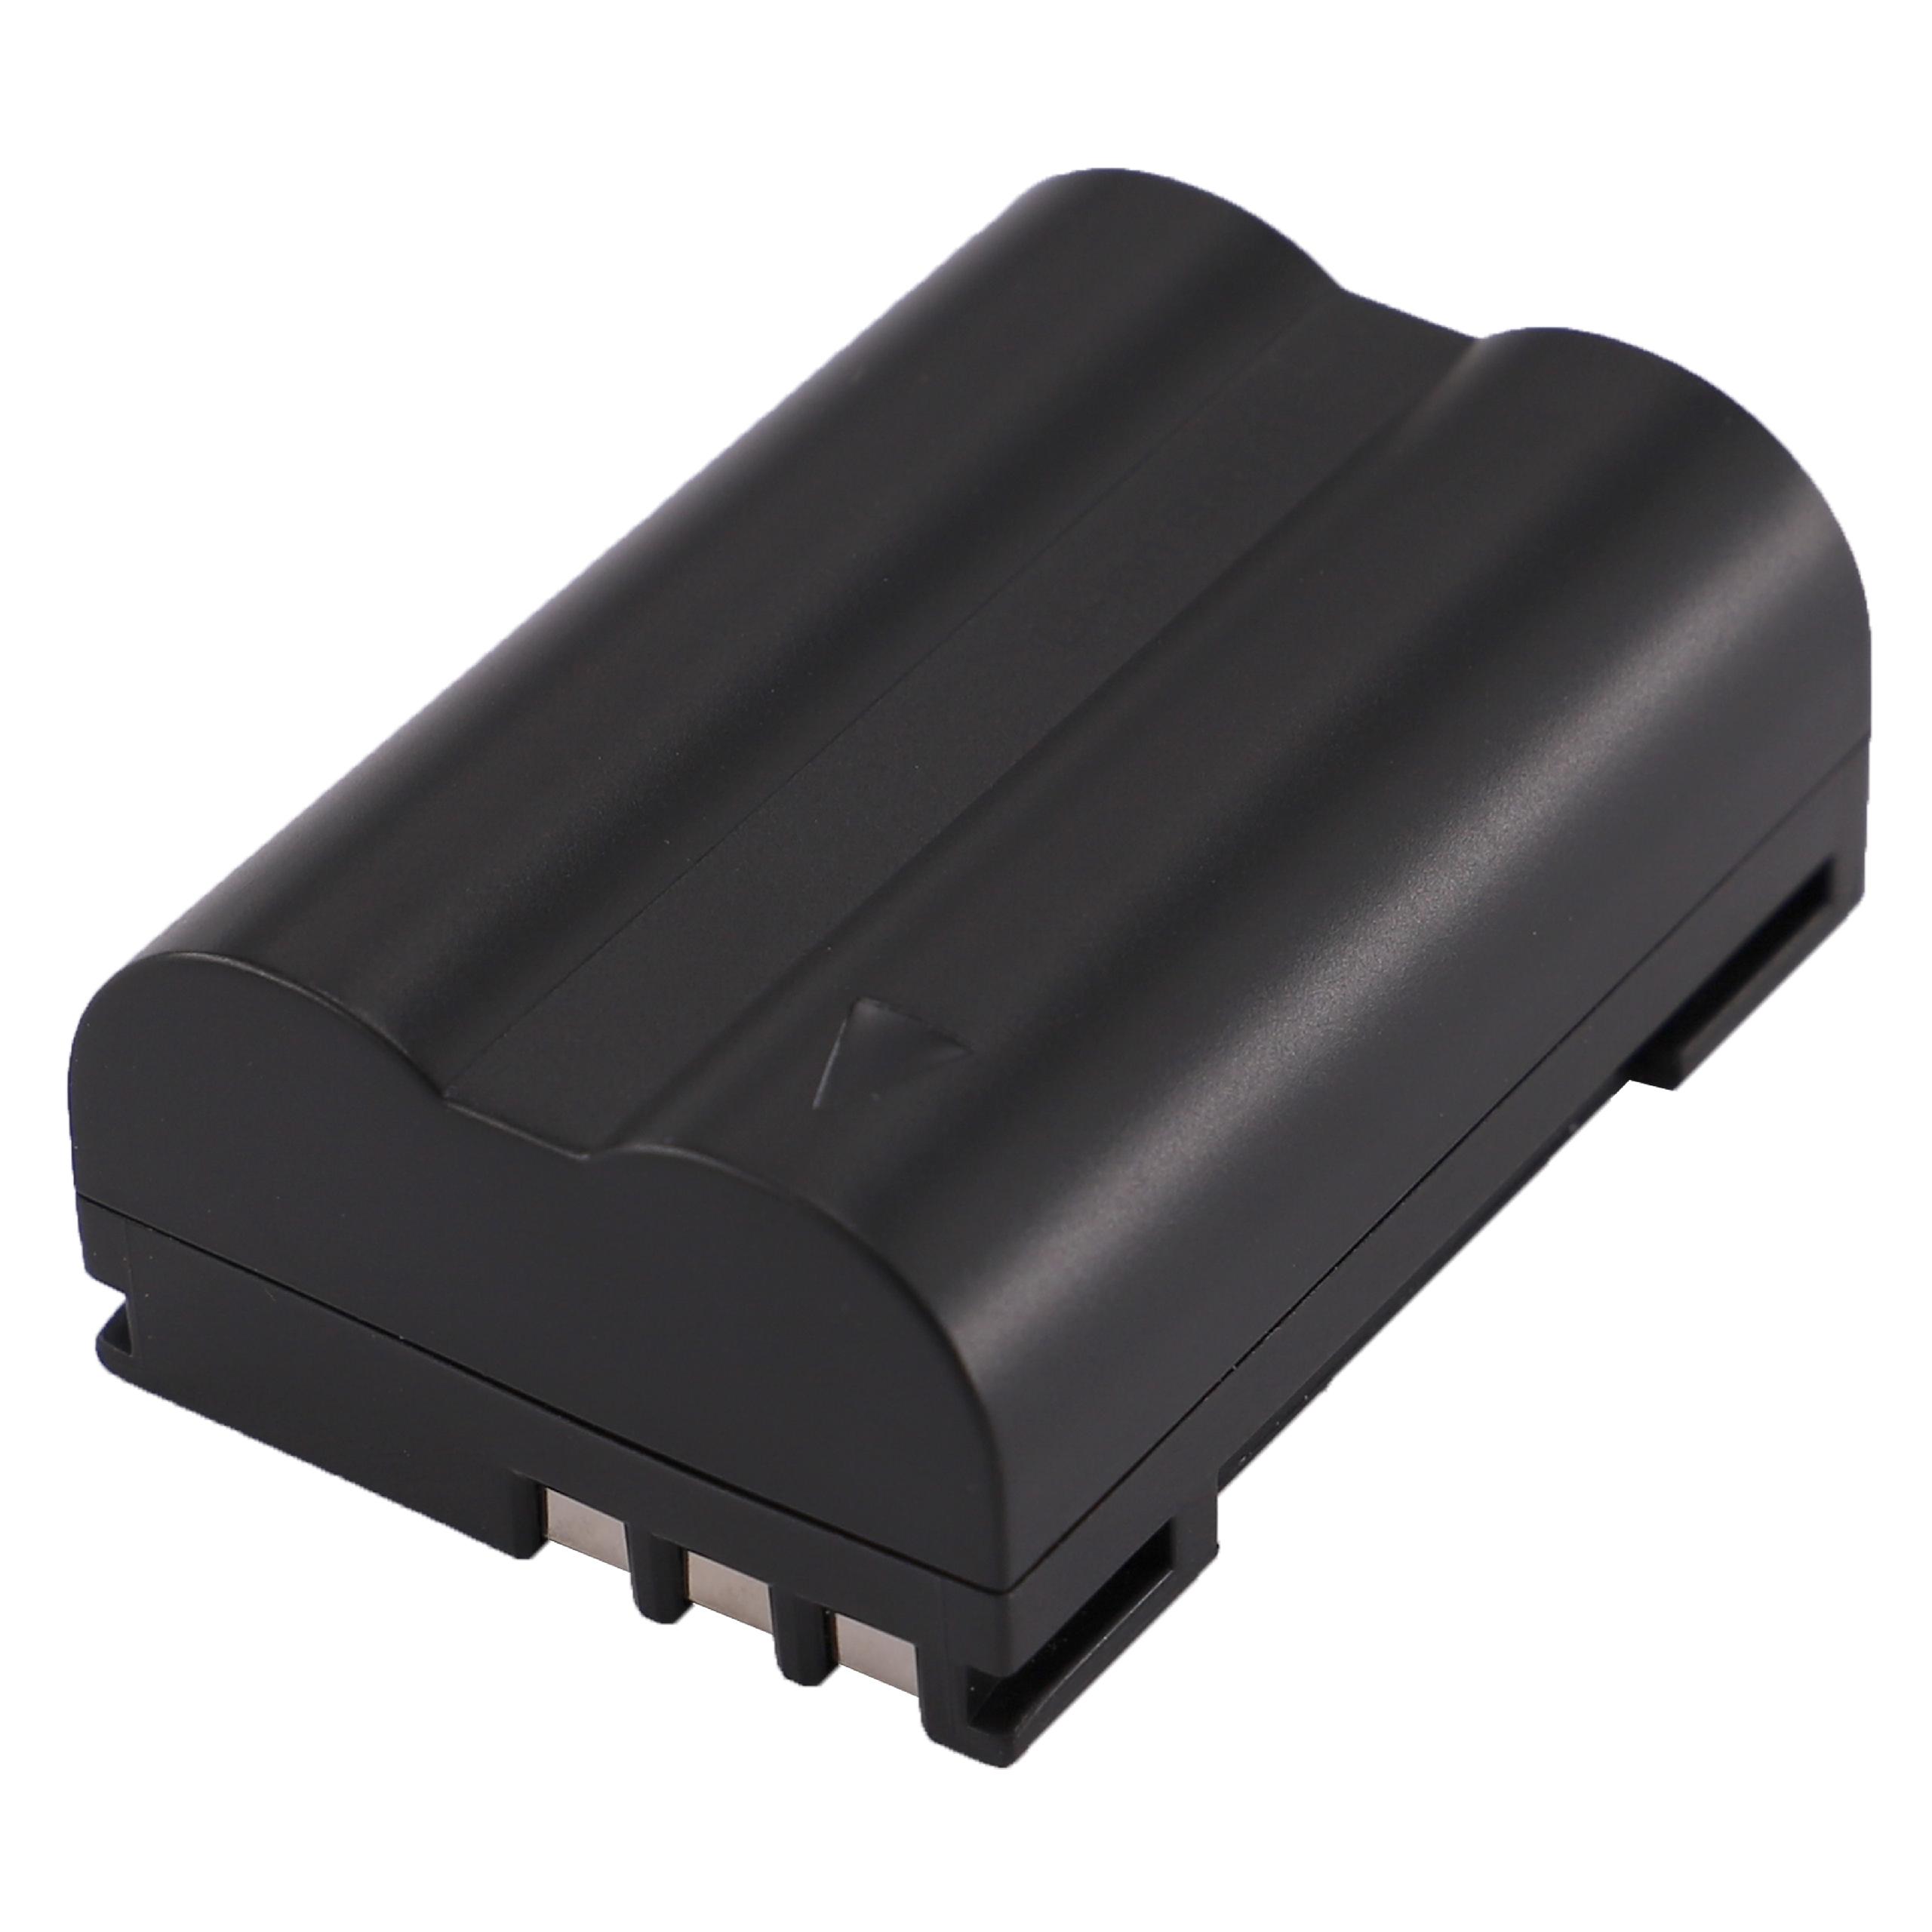 Battery (2 Units) Replacement for Olympus PS-BLM1 - 1600mAh, 7.4V, Li-Ion